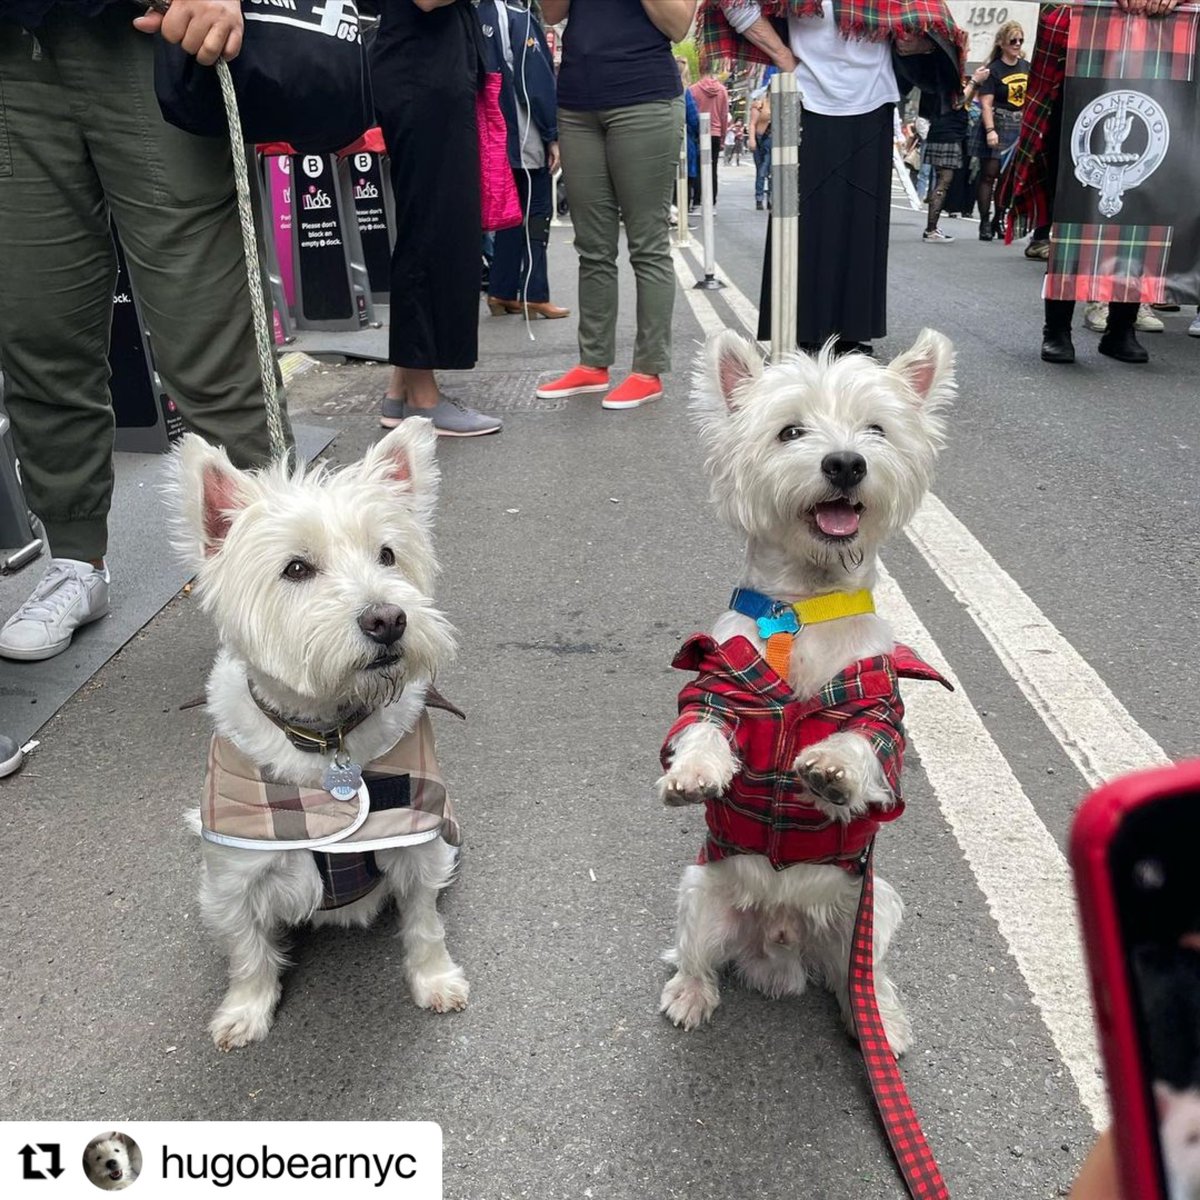 Celebrating my Scottish heritage 😍🐾 I got to meet so many Westies and other doggos, it was fantastic!! My humans were lucky that @nyctartanweek happened right after we arrived to New York 😅❤️